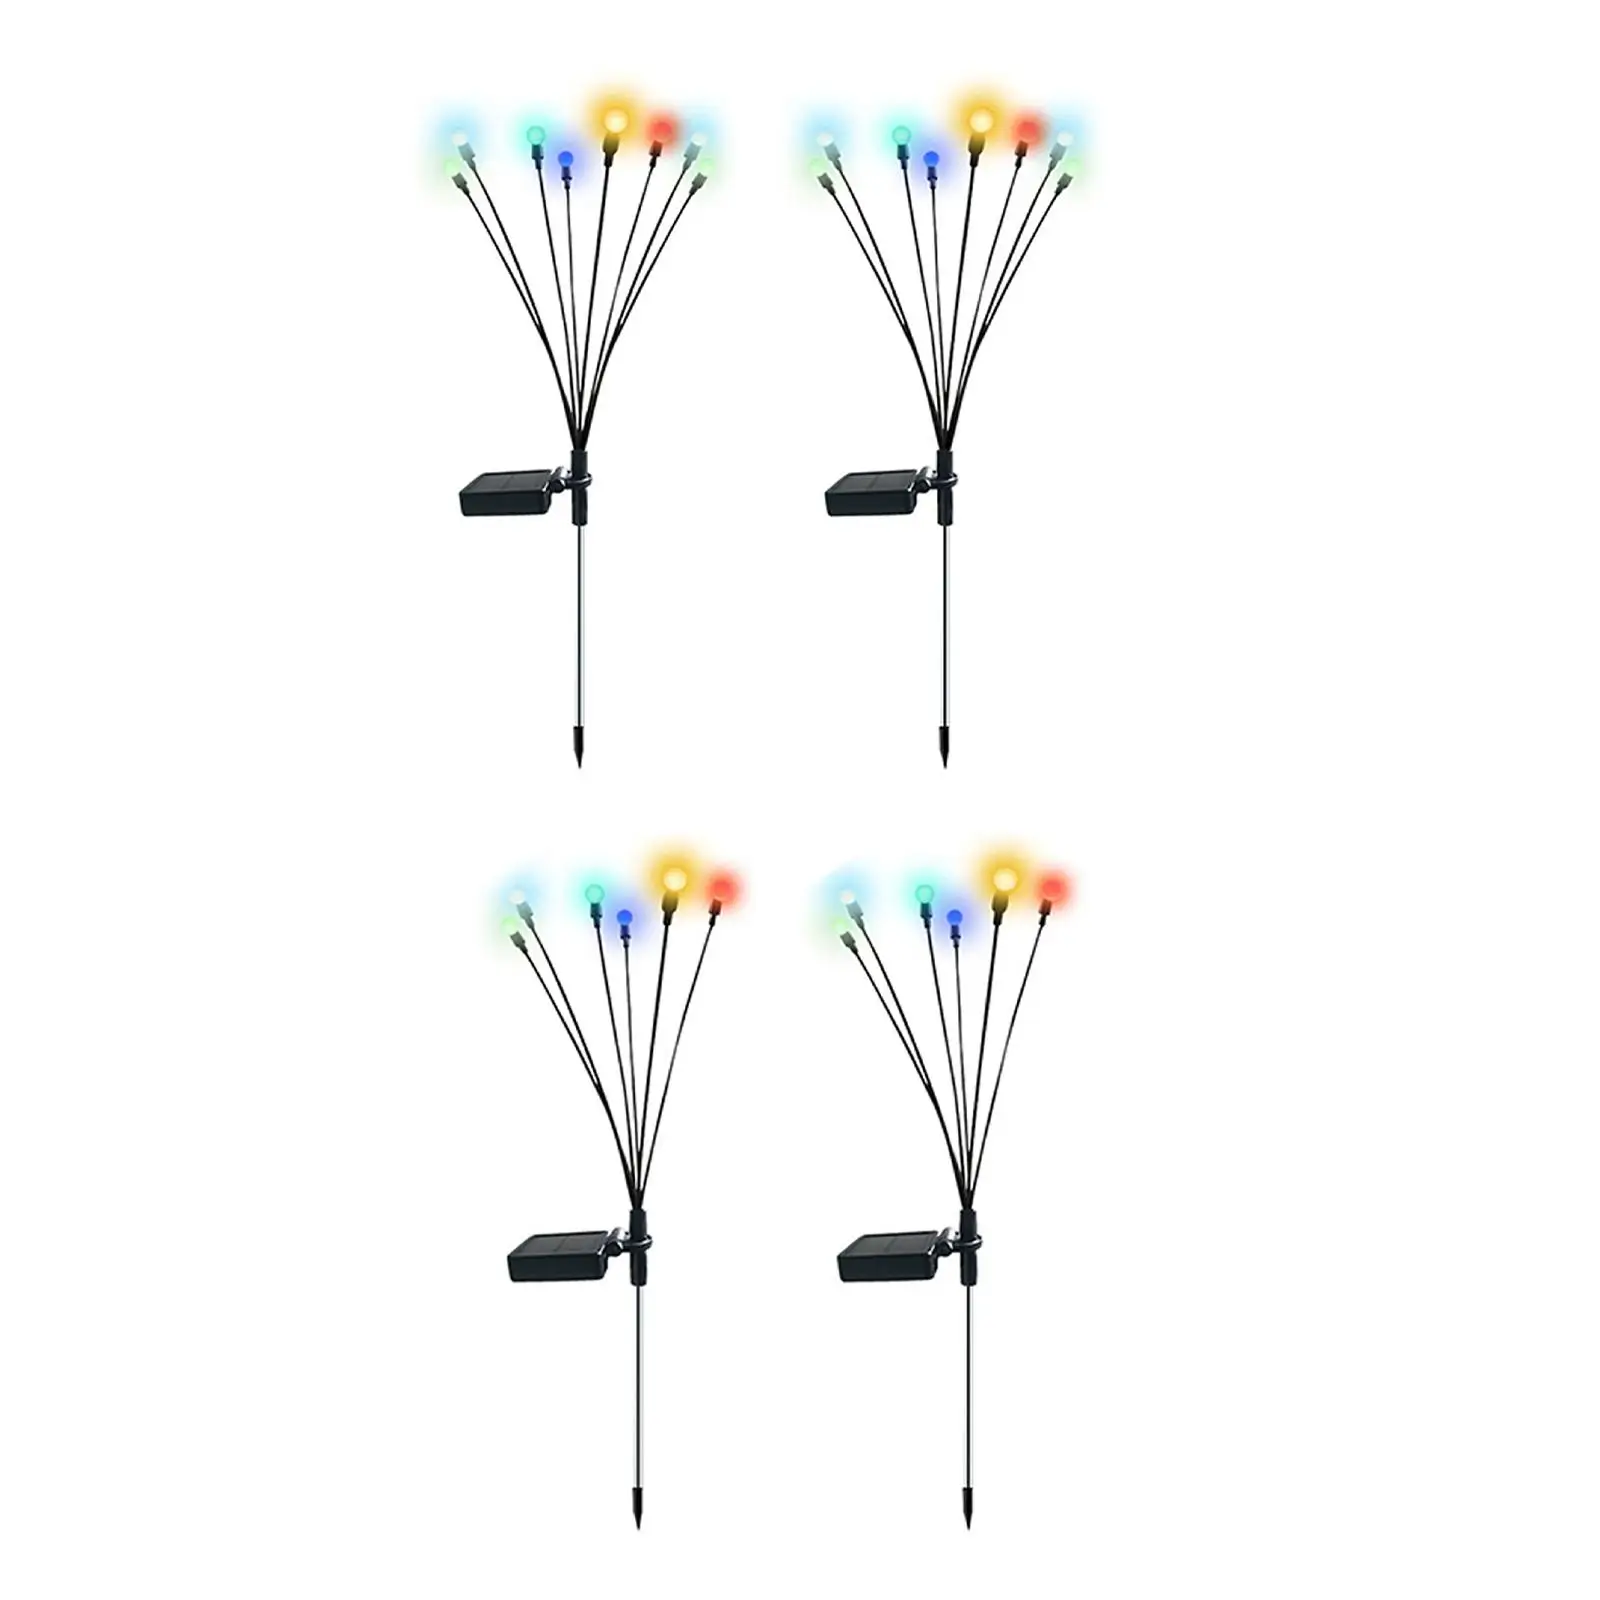 LED Solar Light IP65 Waterproof Multi Colour Decorative Swaying Light Lamp Stake for Outdoor Pathway Garden Decoration